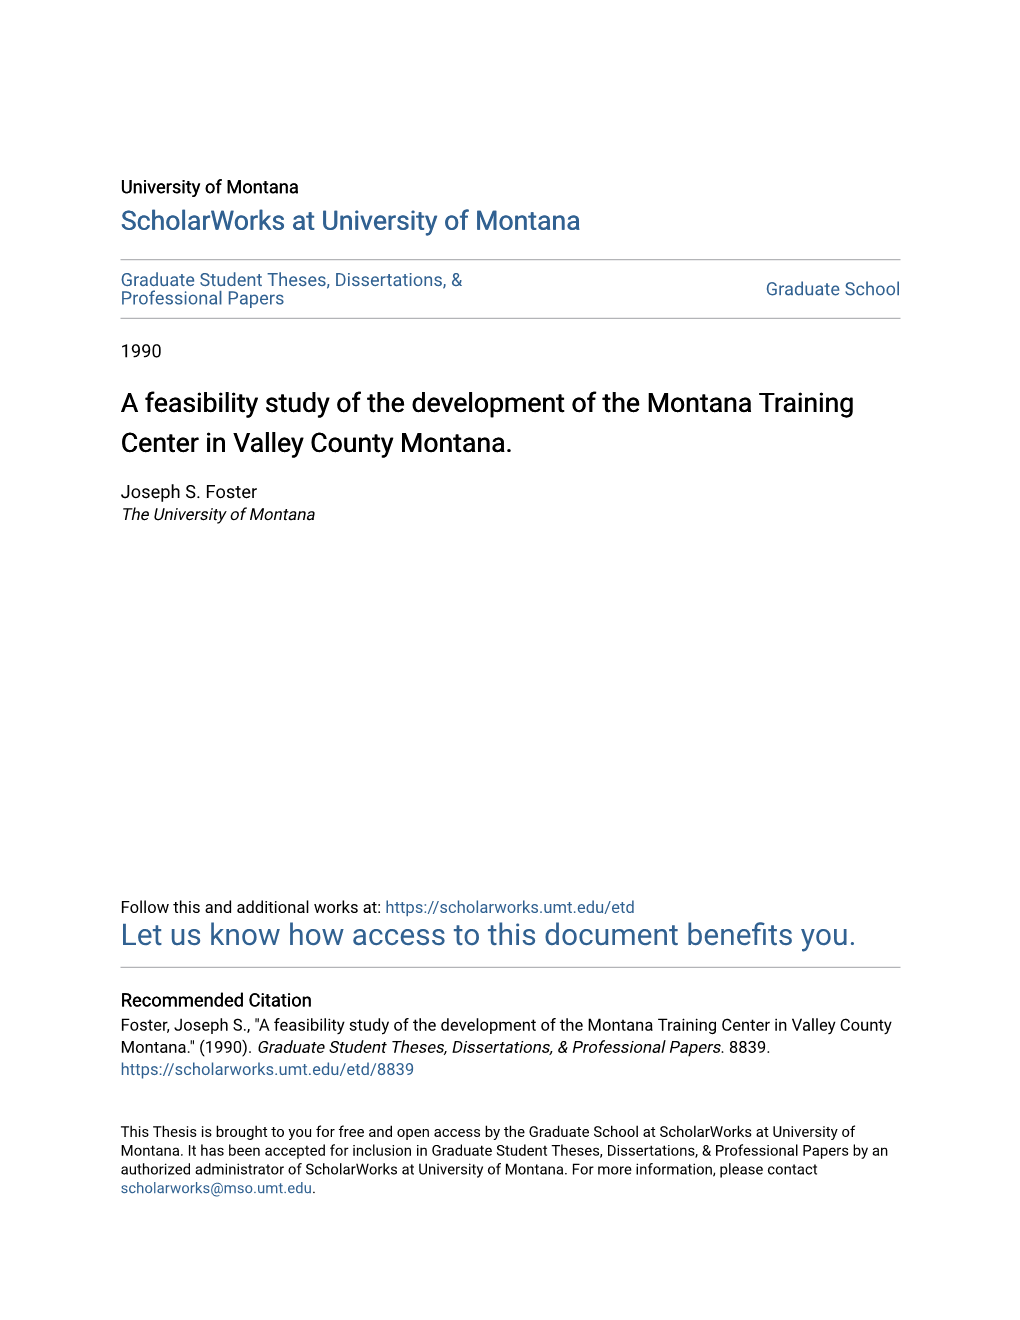 A Feasibility Study of the Development of the Montana Training Center in Valley County Montana